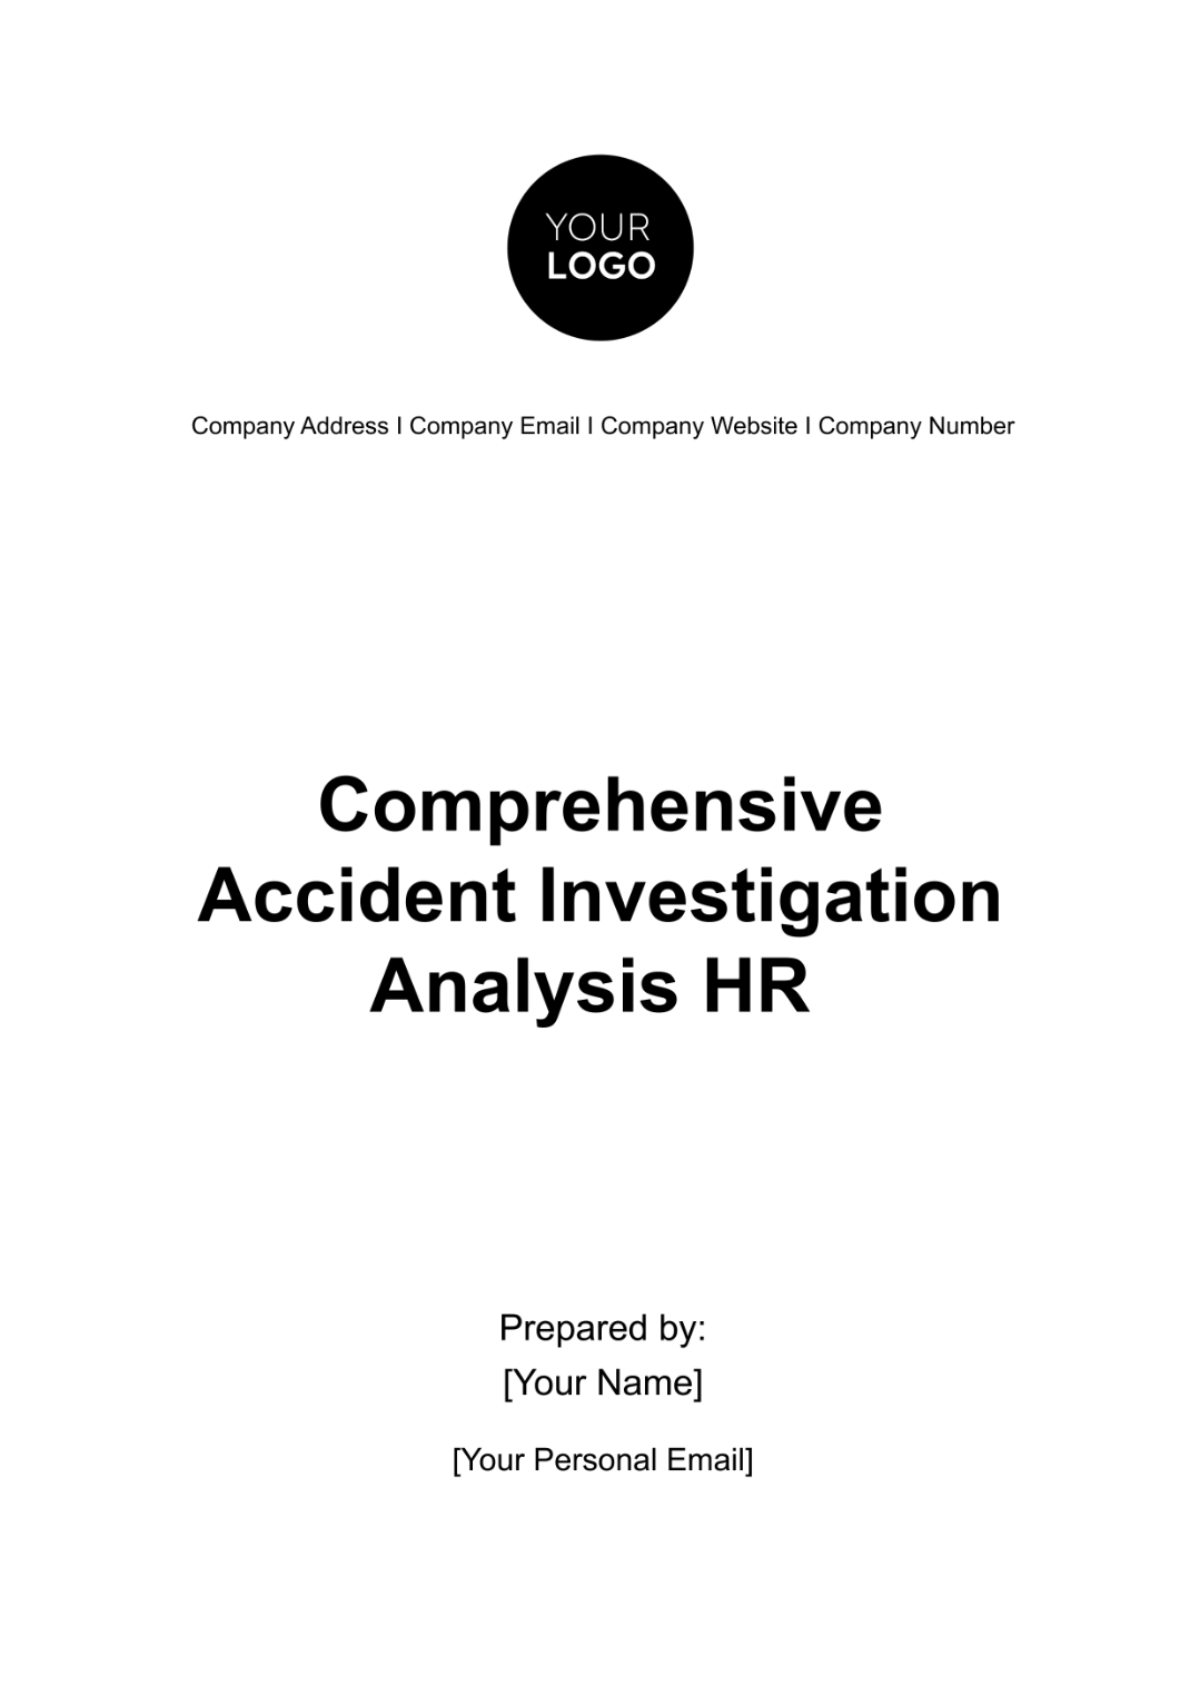 Free Comprehensive Accident Investigation Analysis HR Template